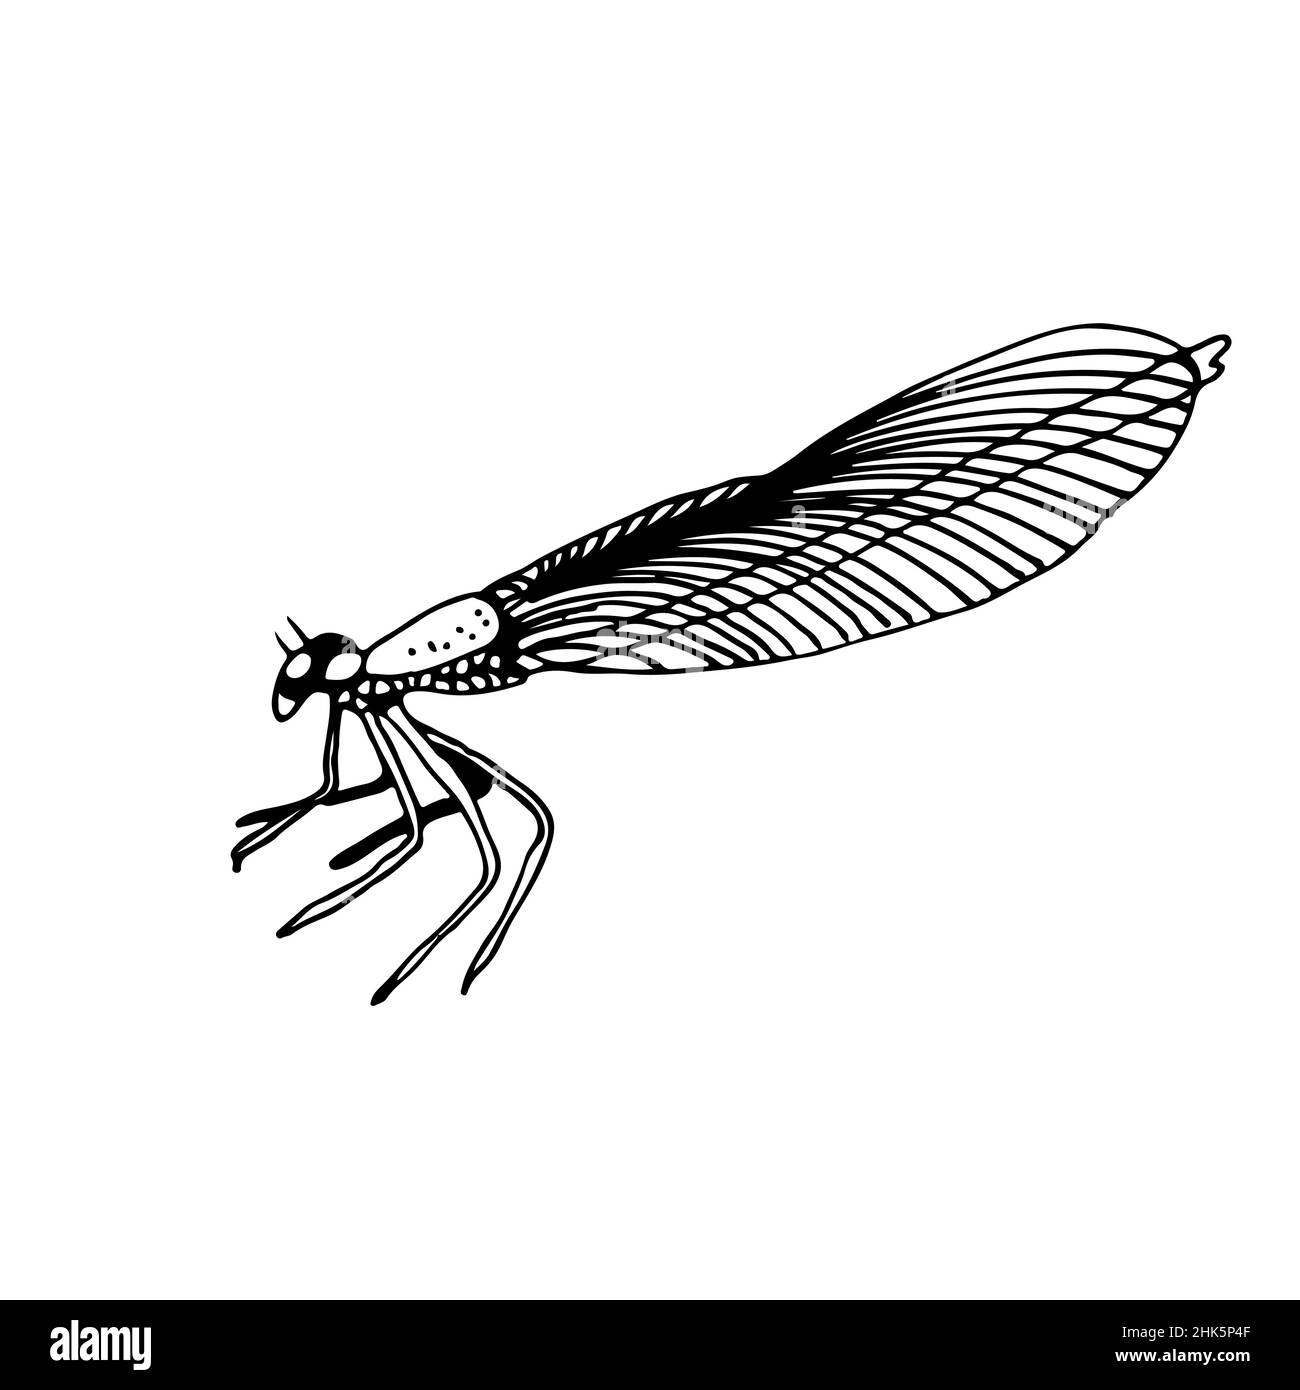 Dragonfly vector illustration, hand drawn insect isolated on white background Stock Vector